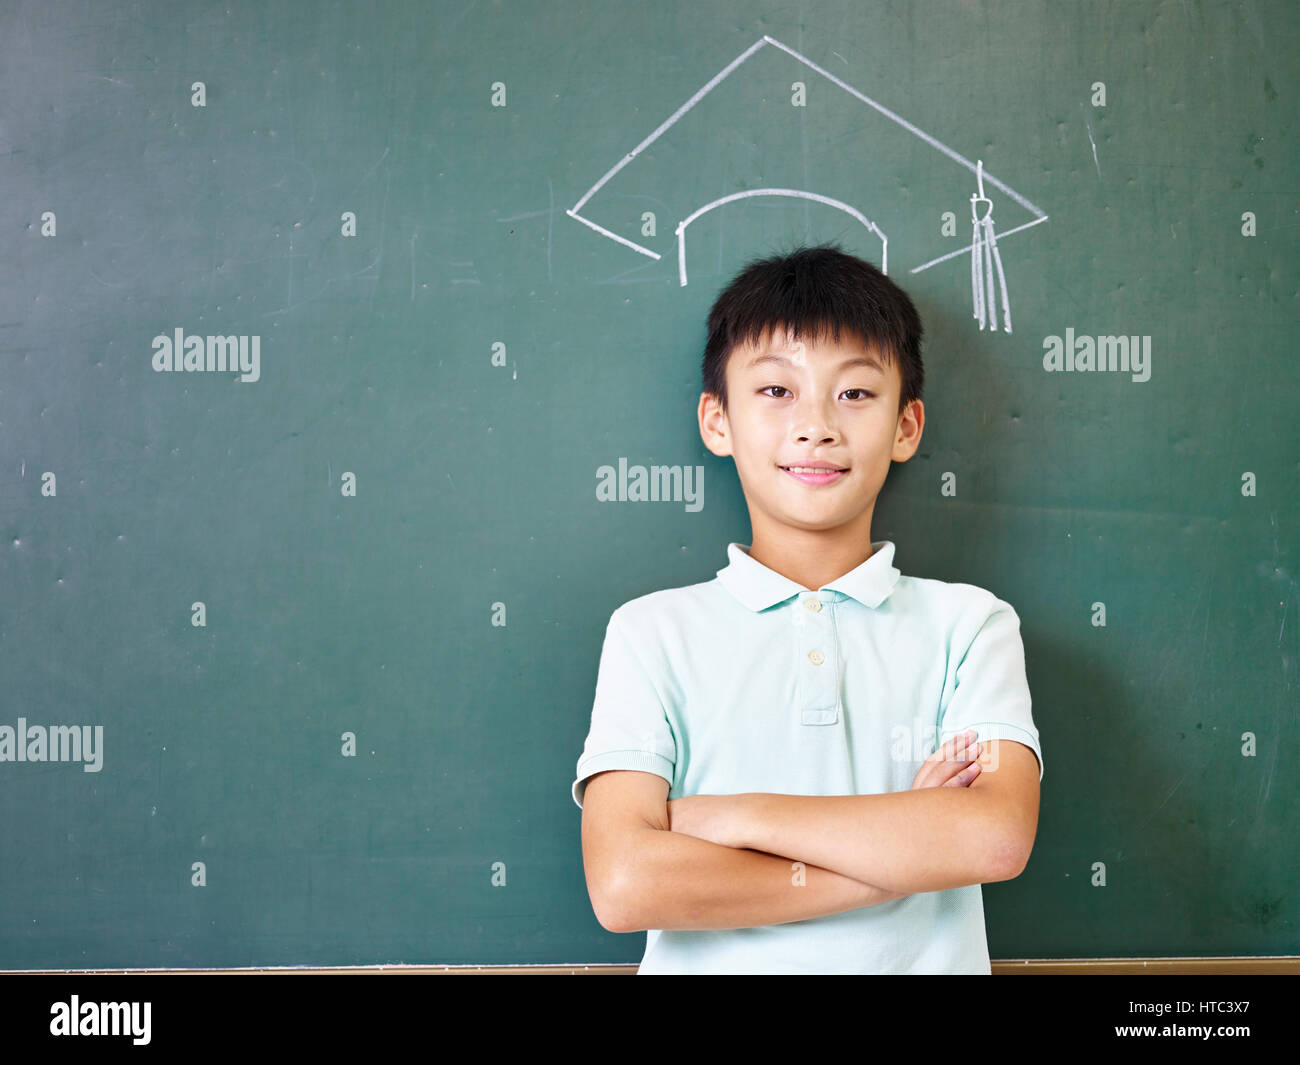 asian elementary school boy standing under a doctoral hat drawn with chalk on blackboard. Stock Photo